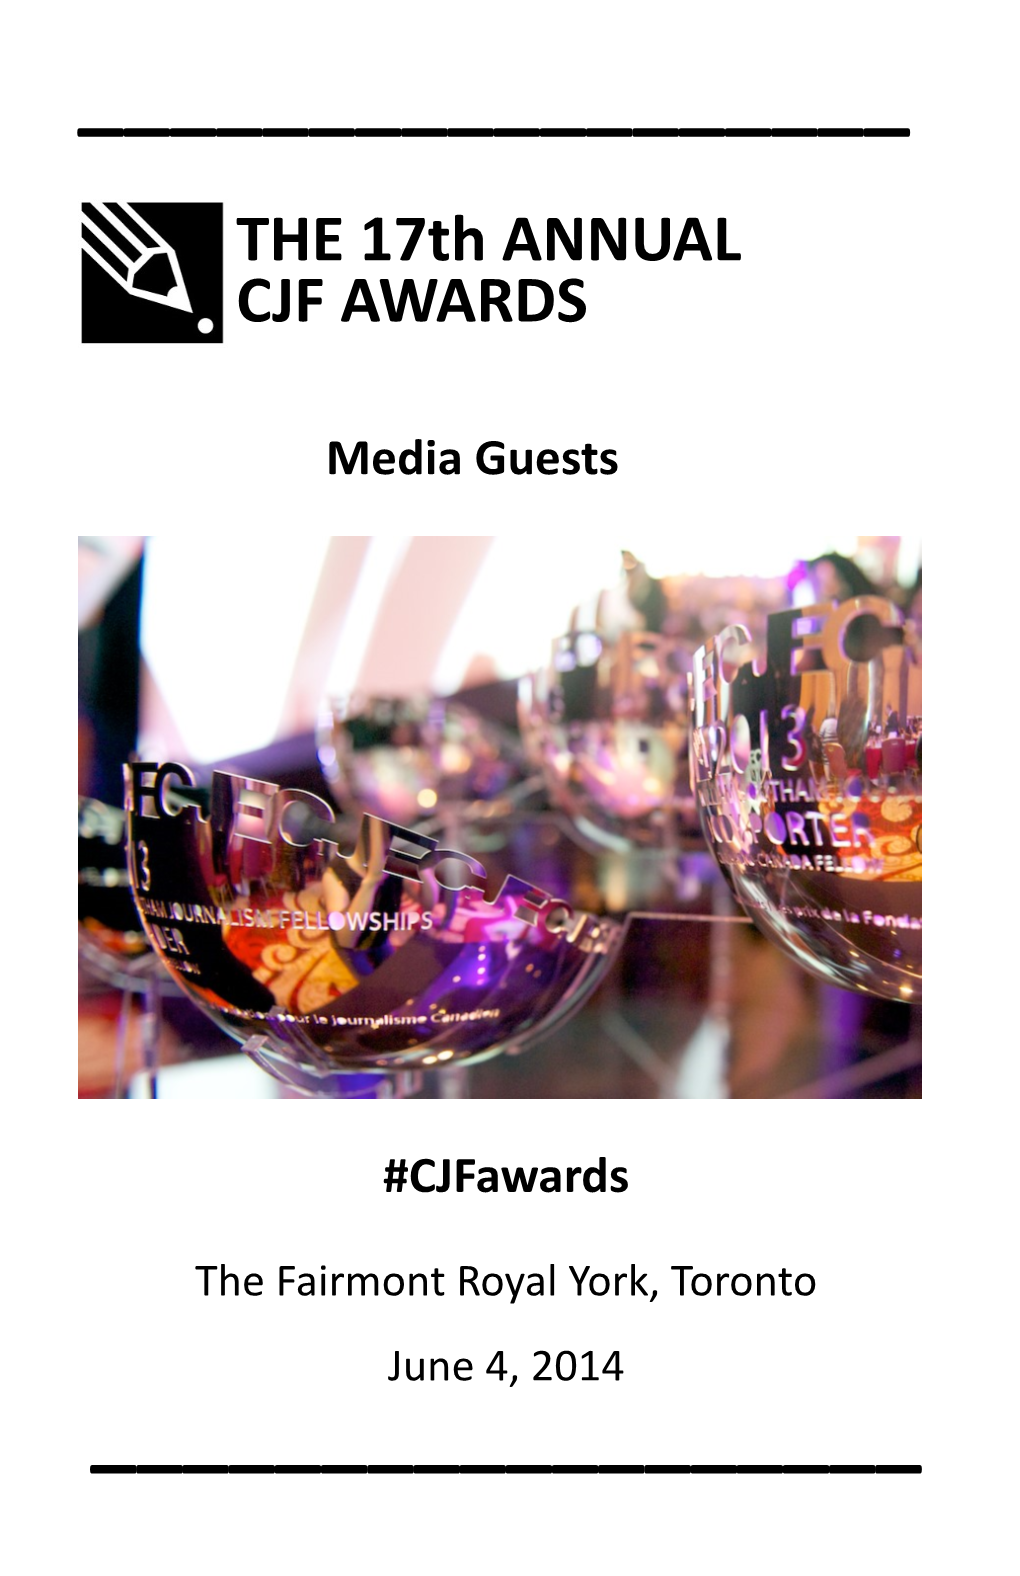 THE 17Th ANNUAL CJF AWARDS